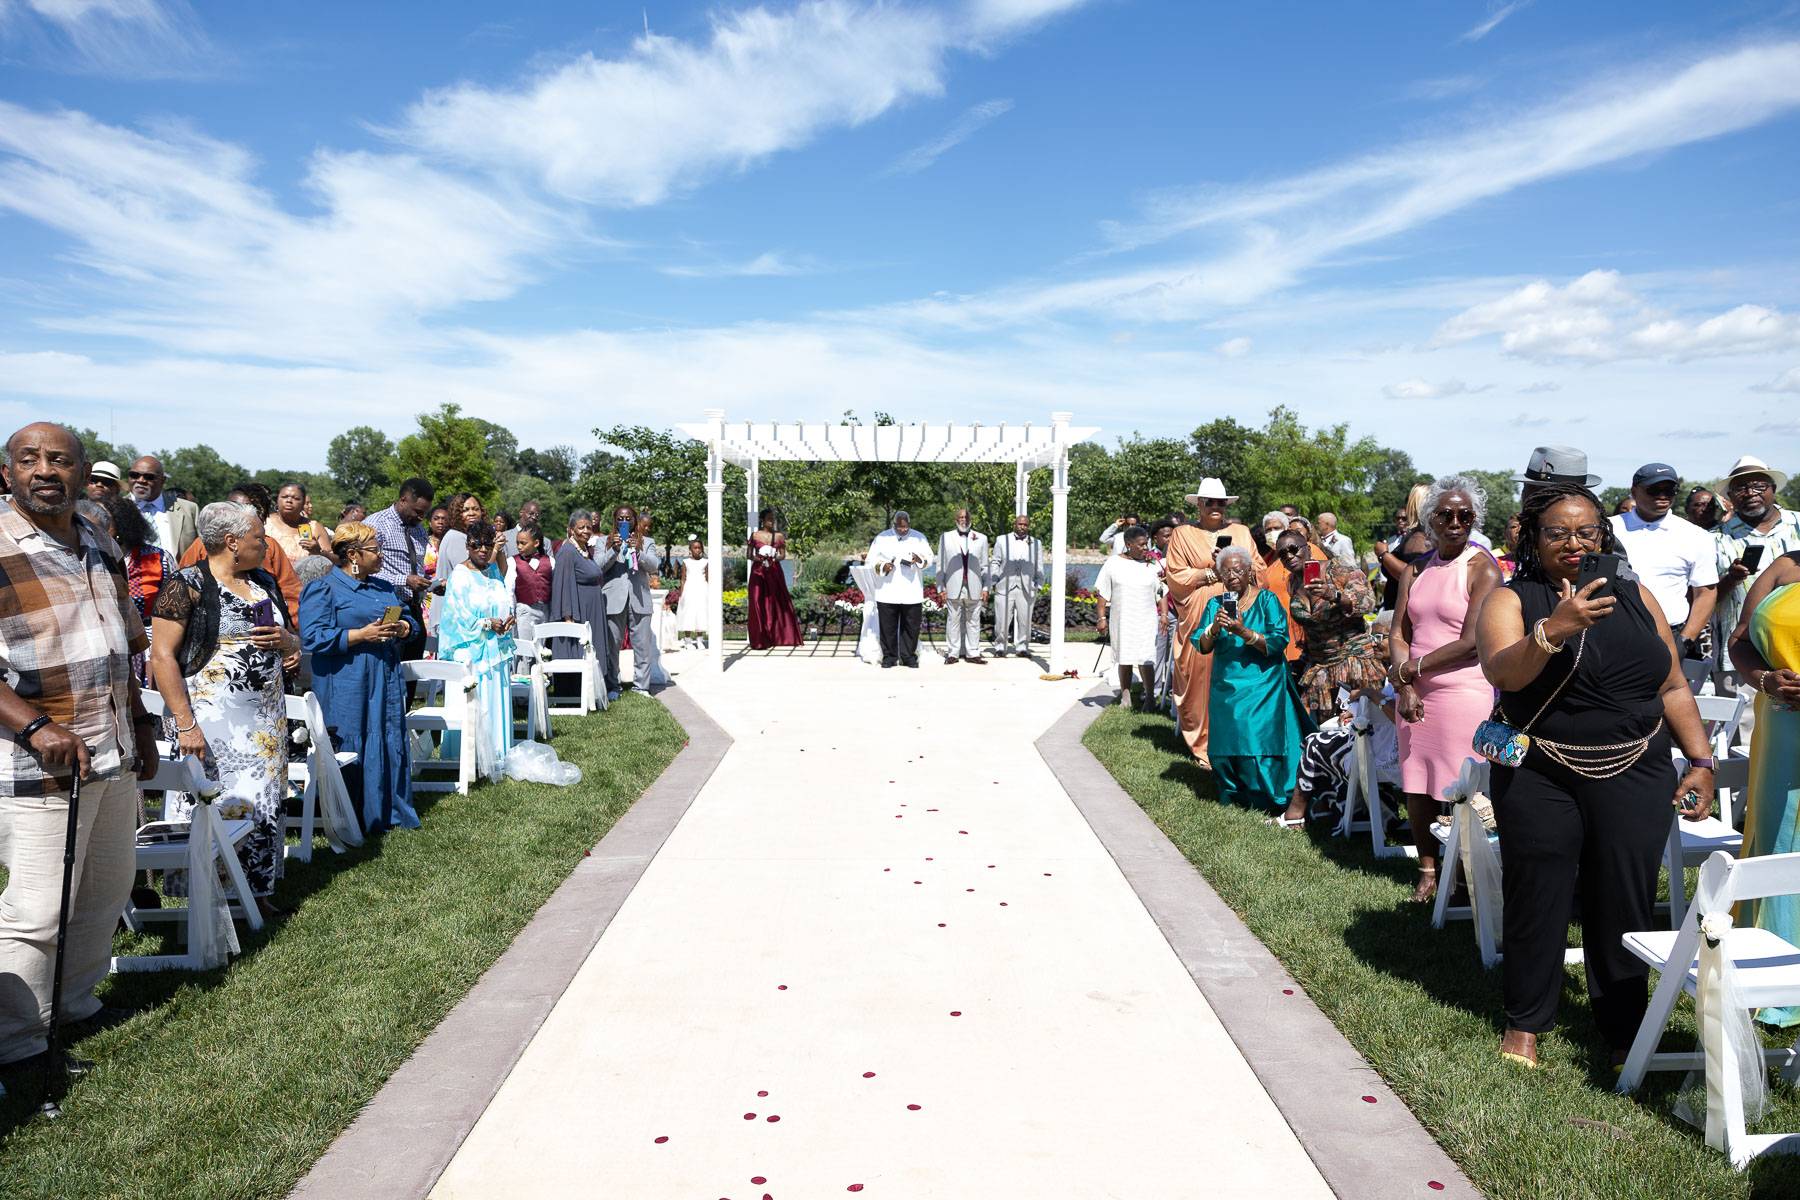 A canopy at the end of the aisle